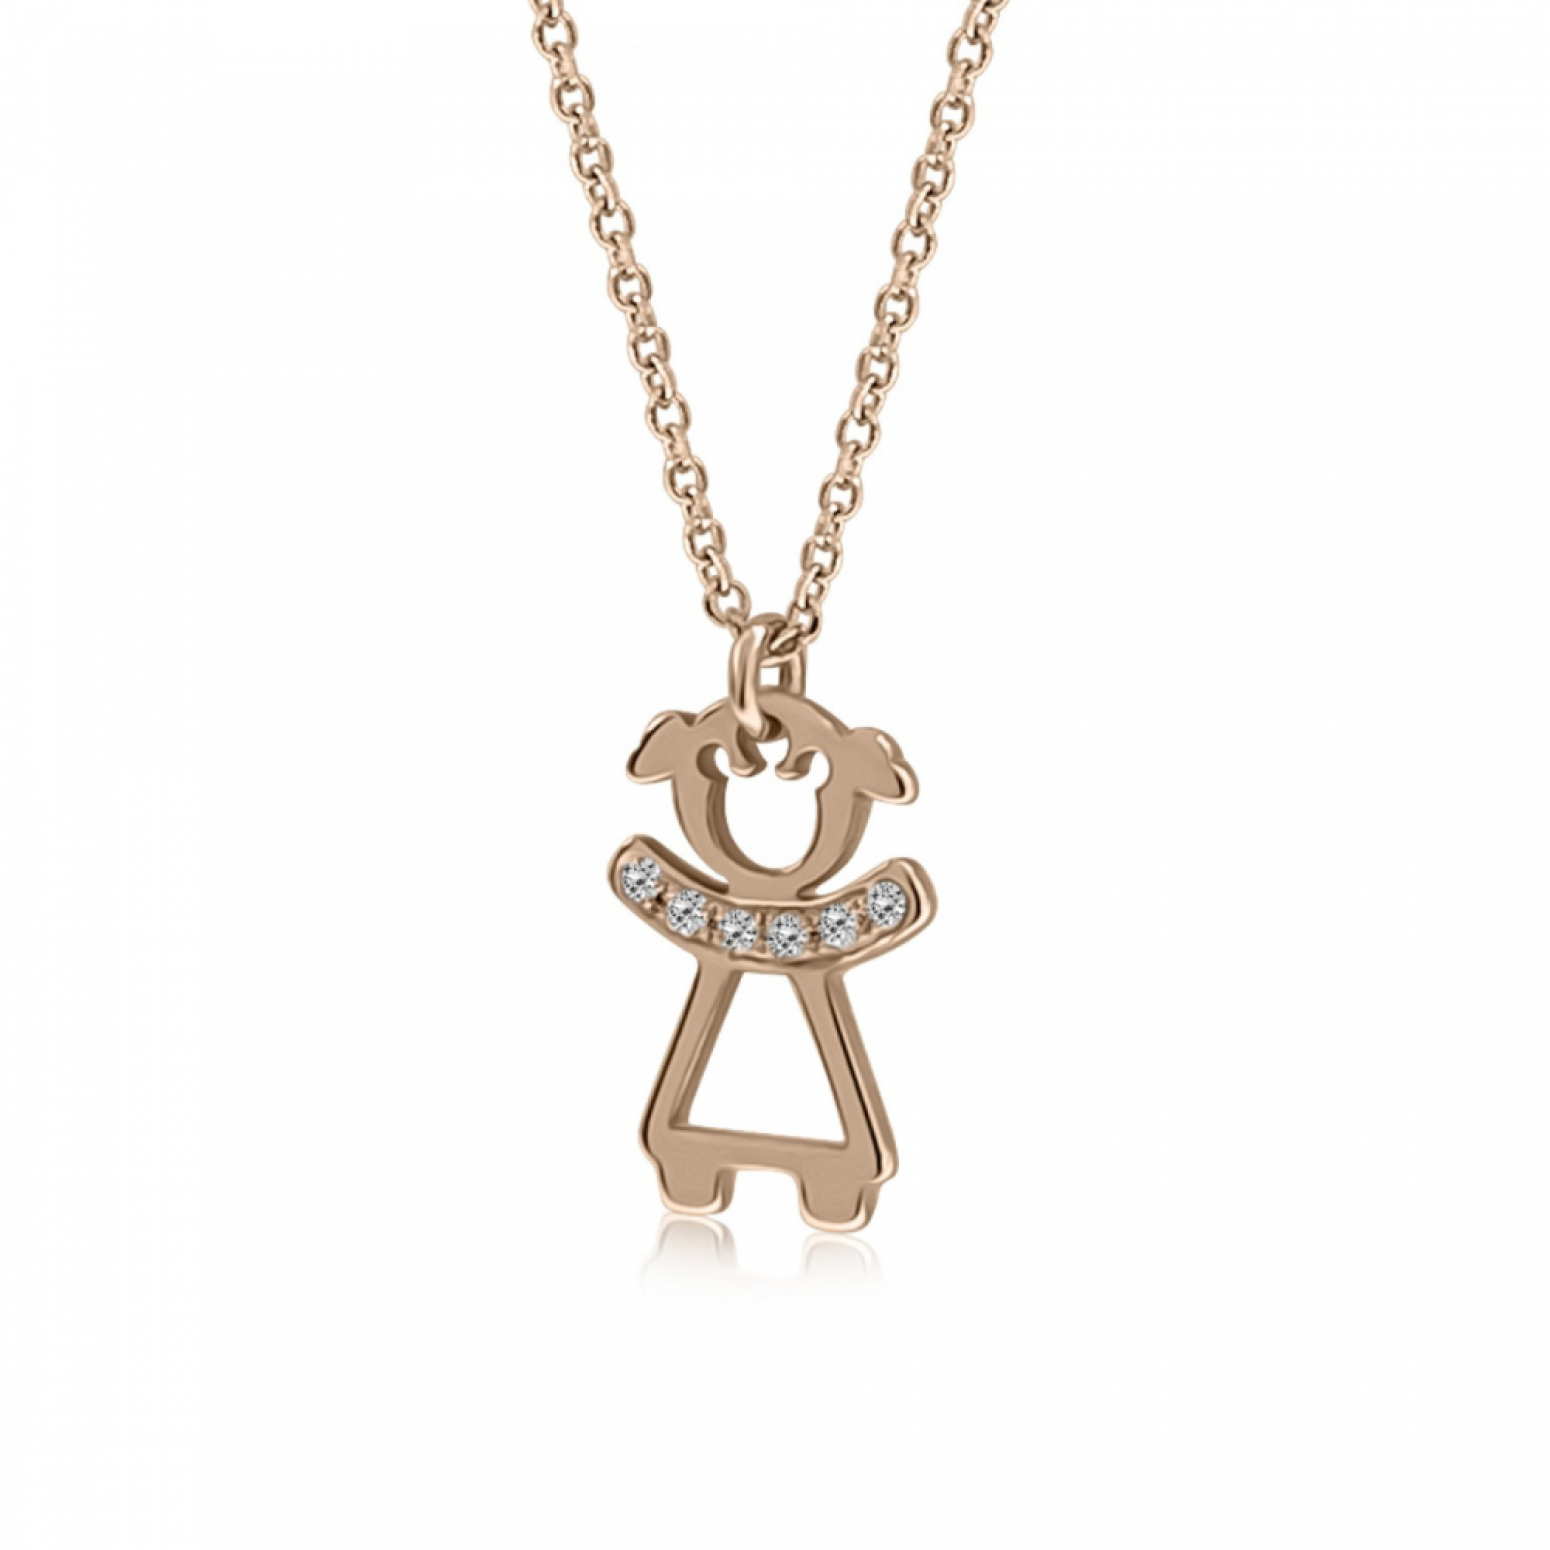 Necklace for baby and mum, K14 pink gold with girl and diamonds 0.03ct, VS2, H, pk0092 NECKLACES Κοσμηματα - chrilia.gr